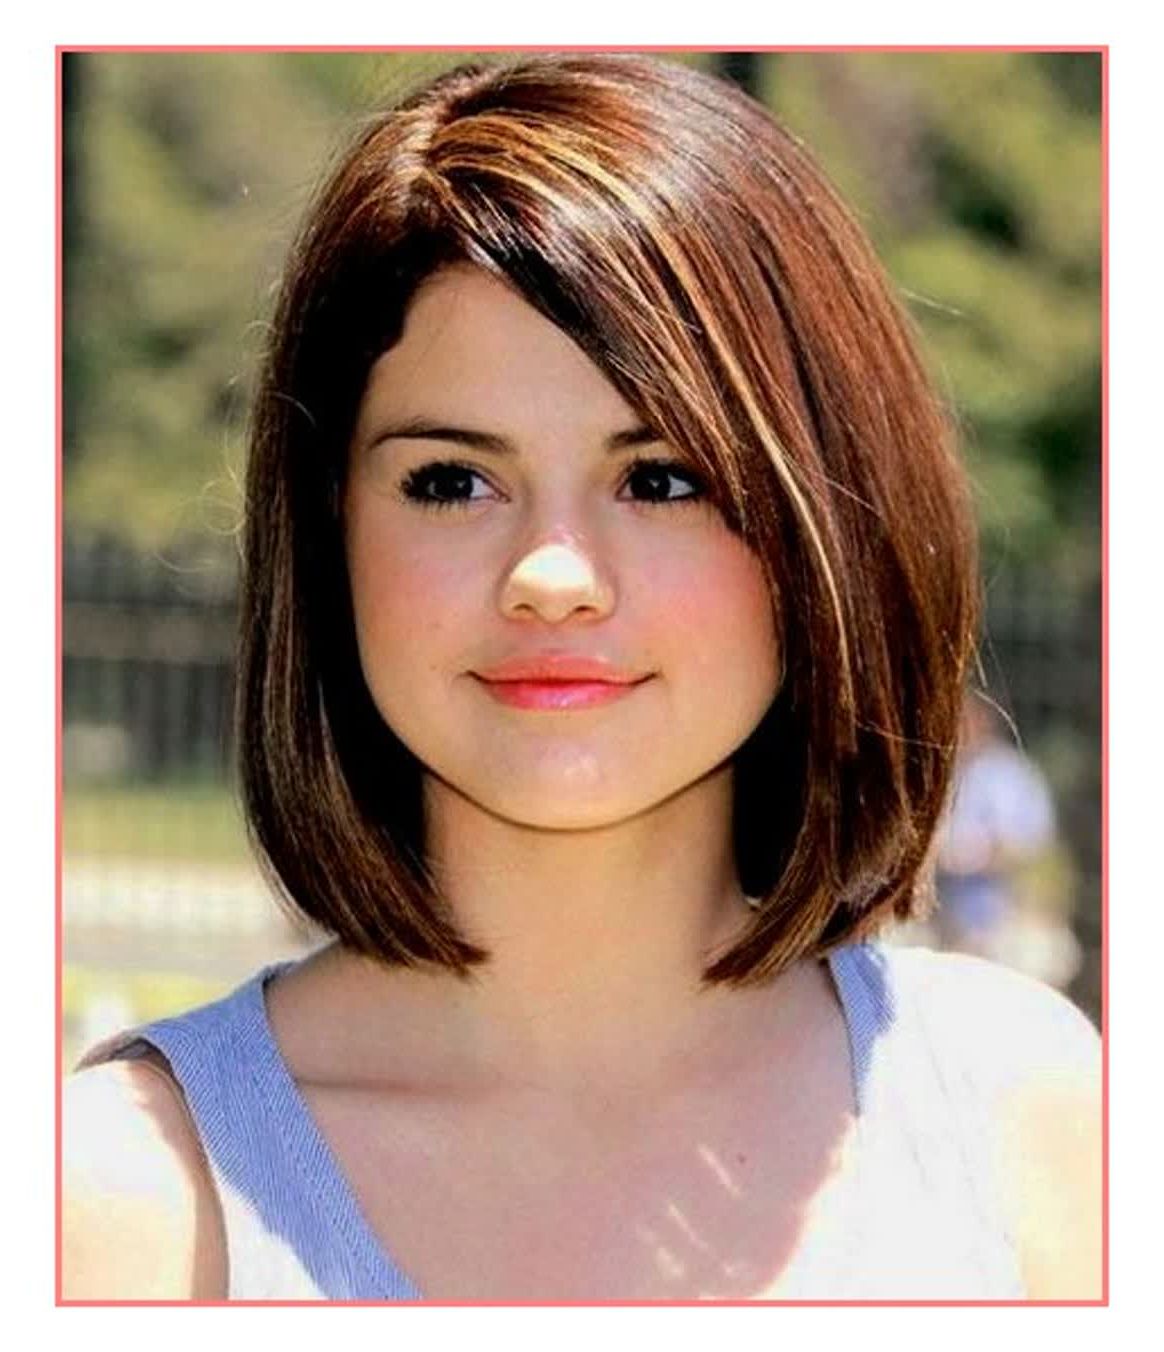 Hair Cuts : Short Haircuts For Ladies With Thick Hair Women Over Inside Short Shoulder Length Hairstyles For Women (View 10 of 25)